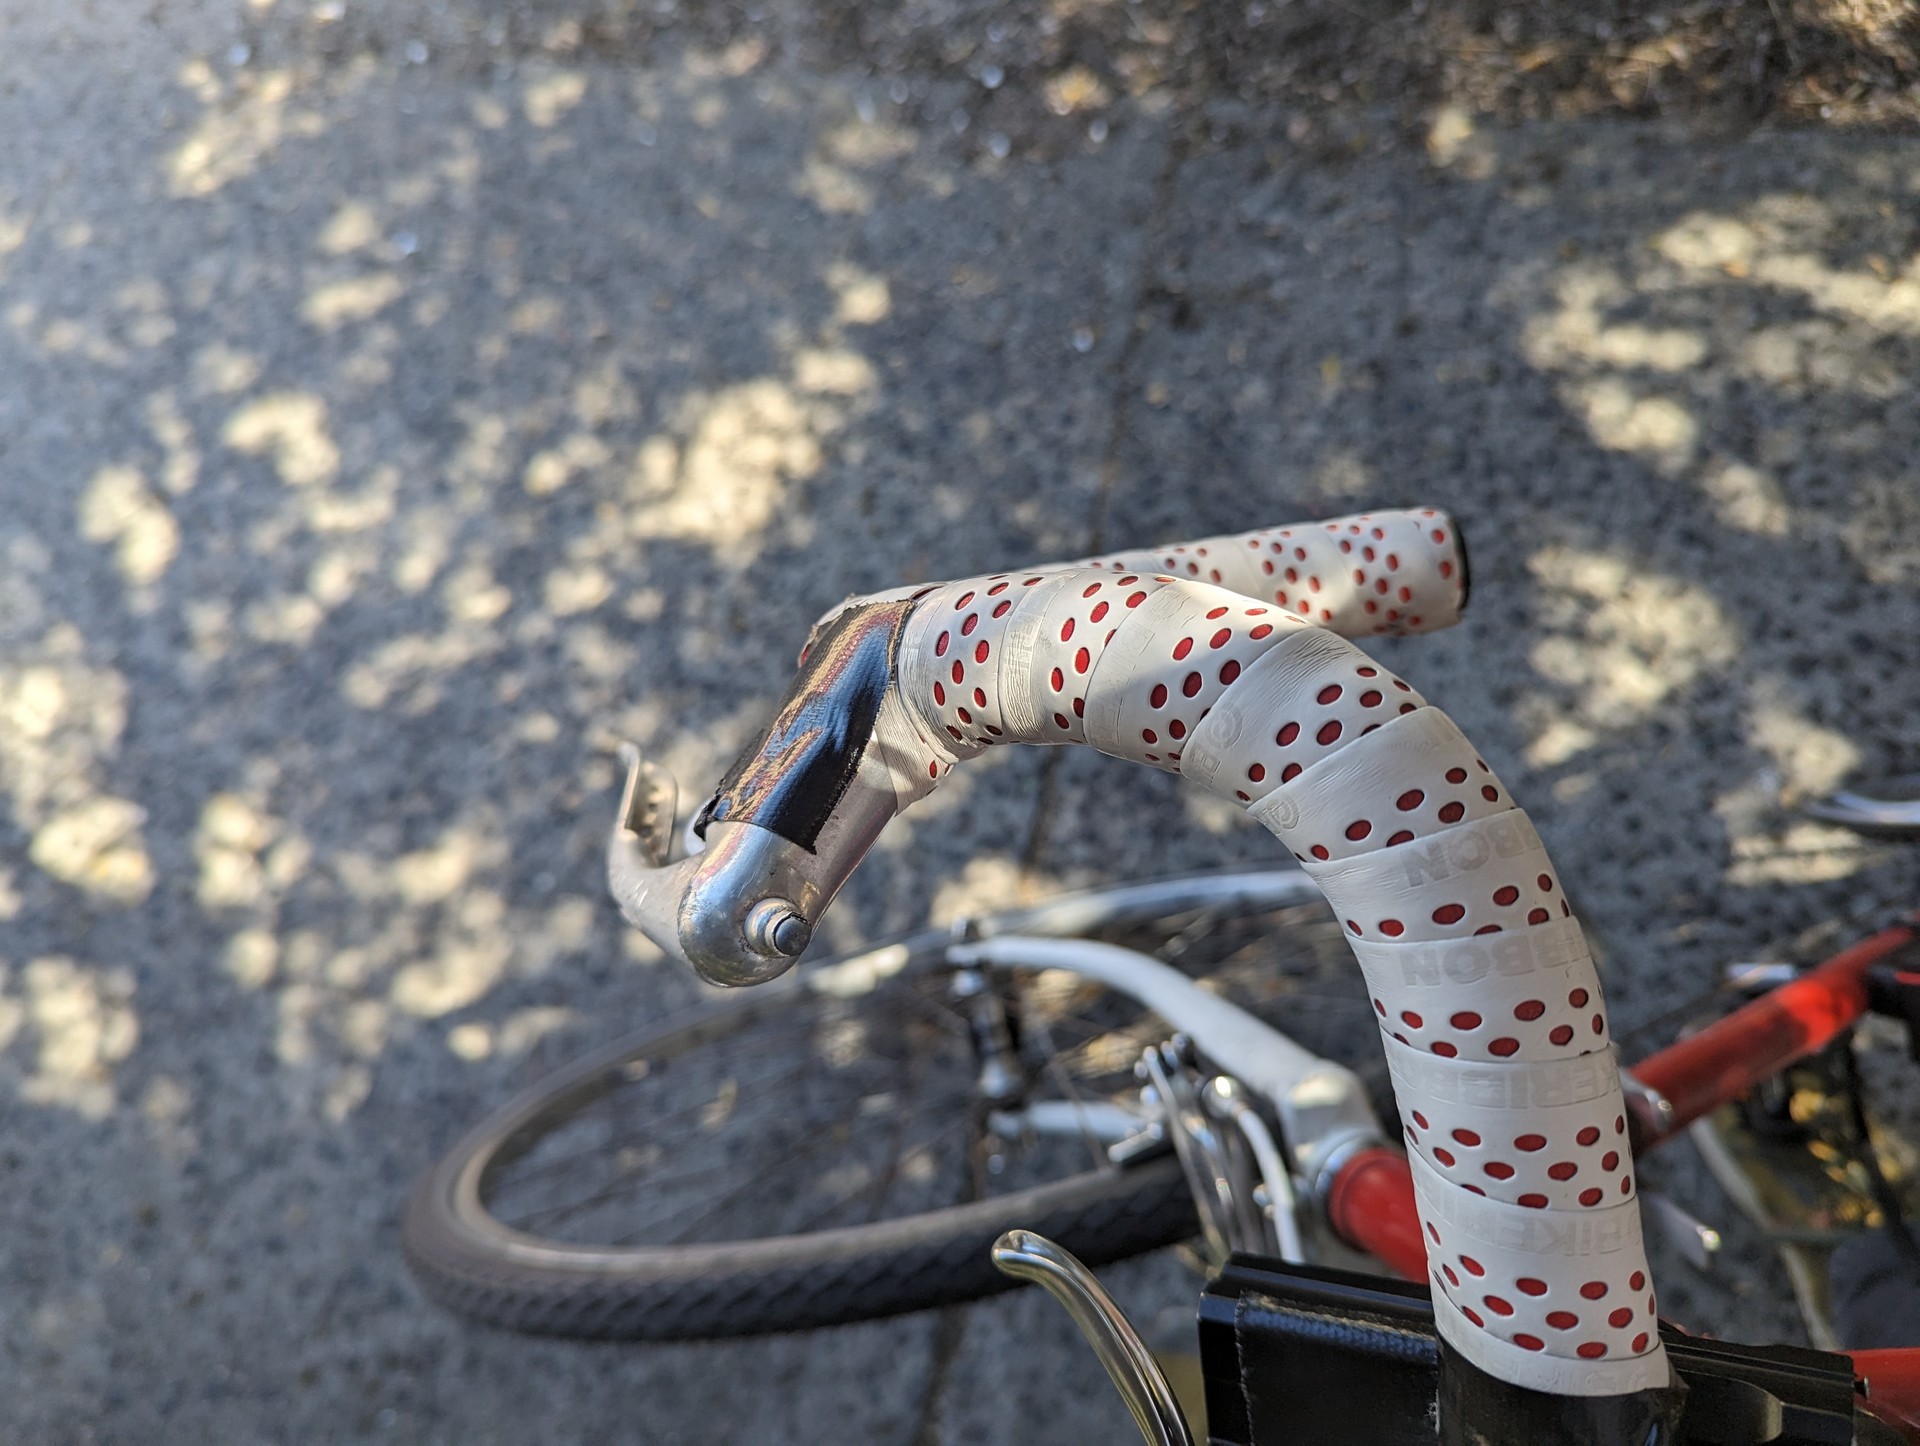 Folded in brake levers from the crash